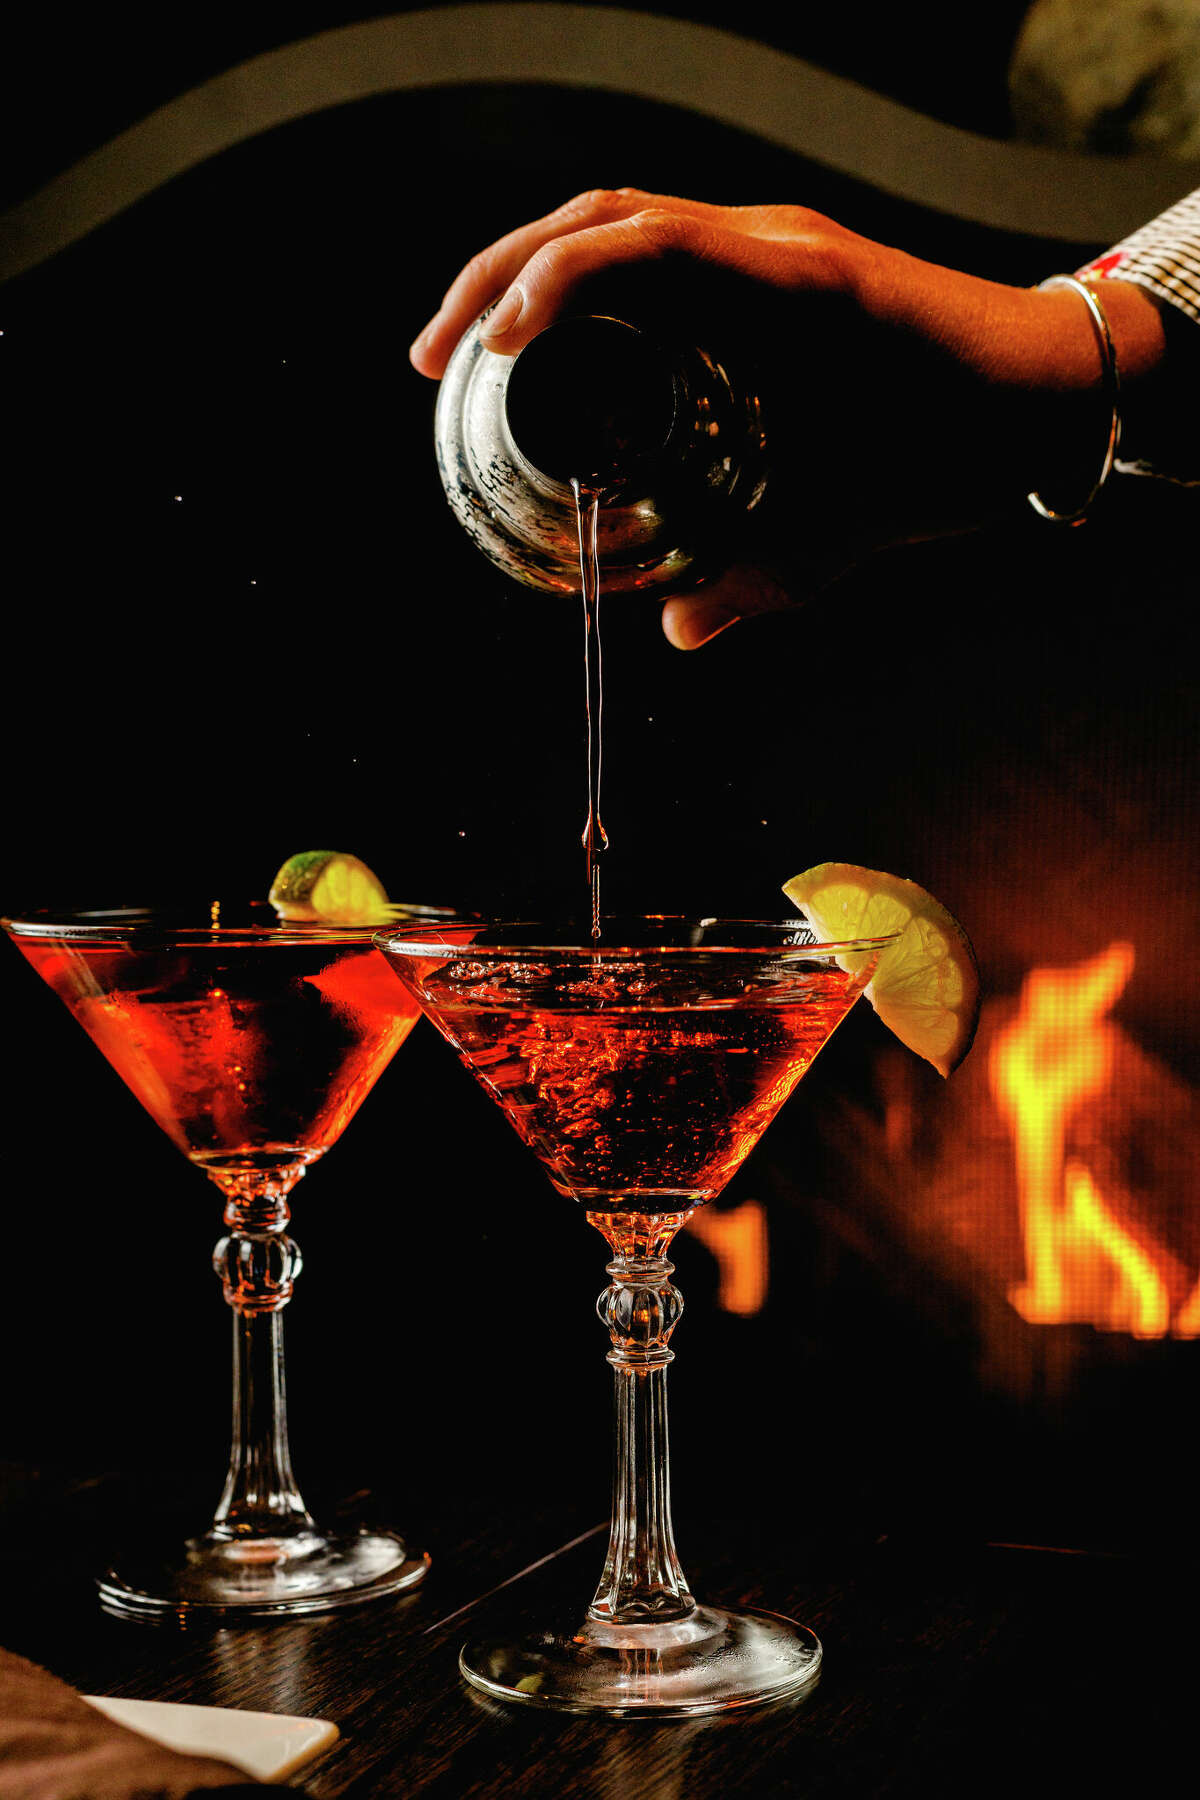 Two martini glasses being poured in front of a roaring fire